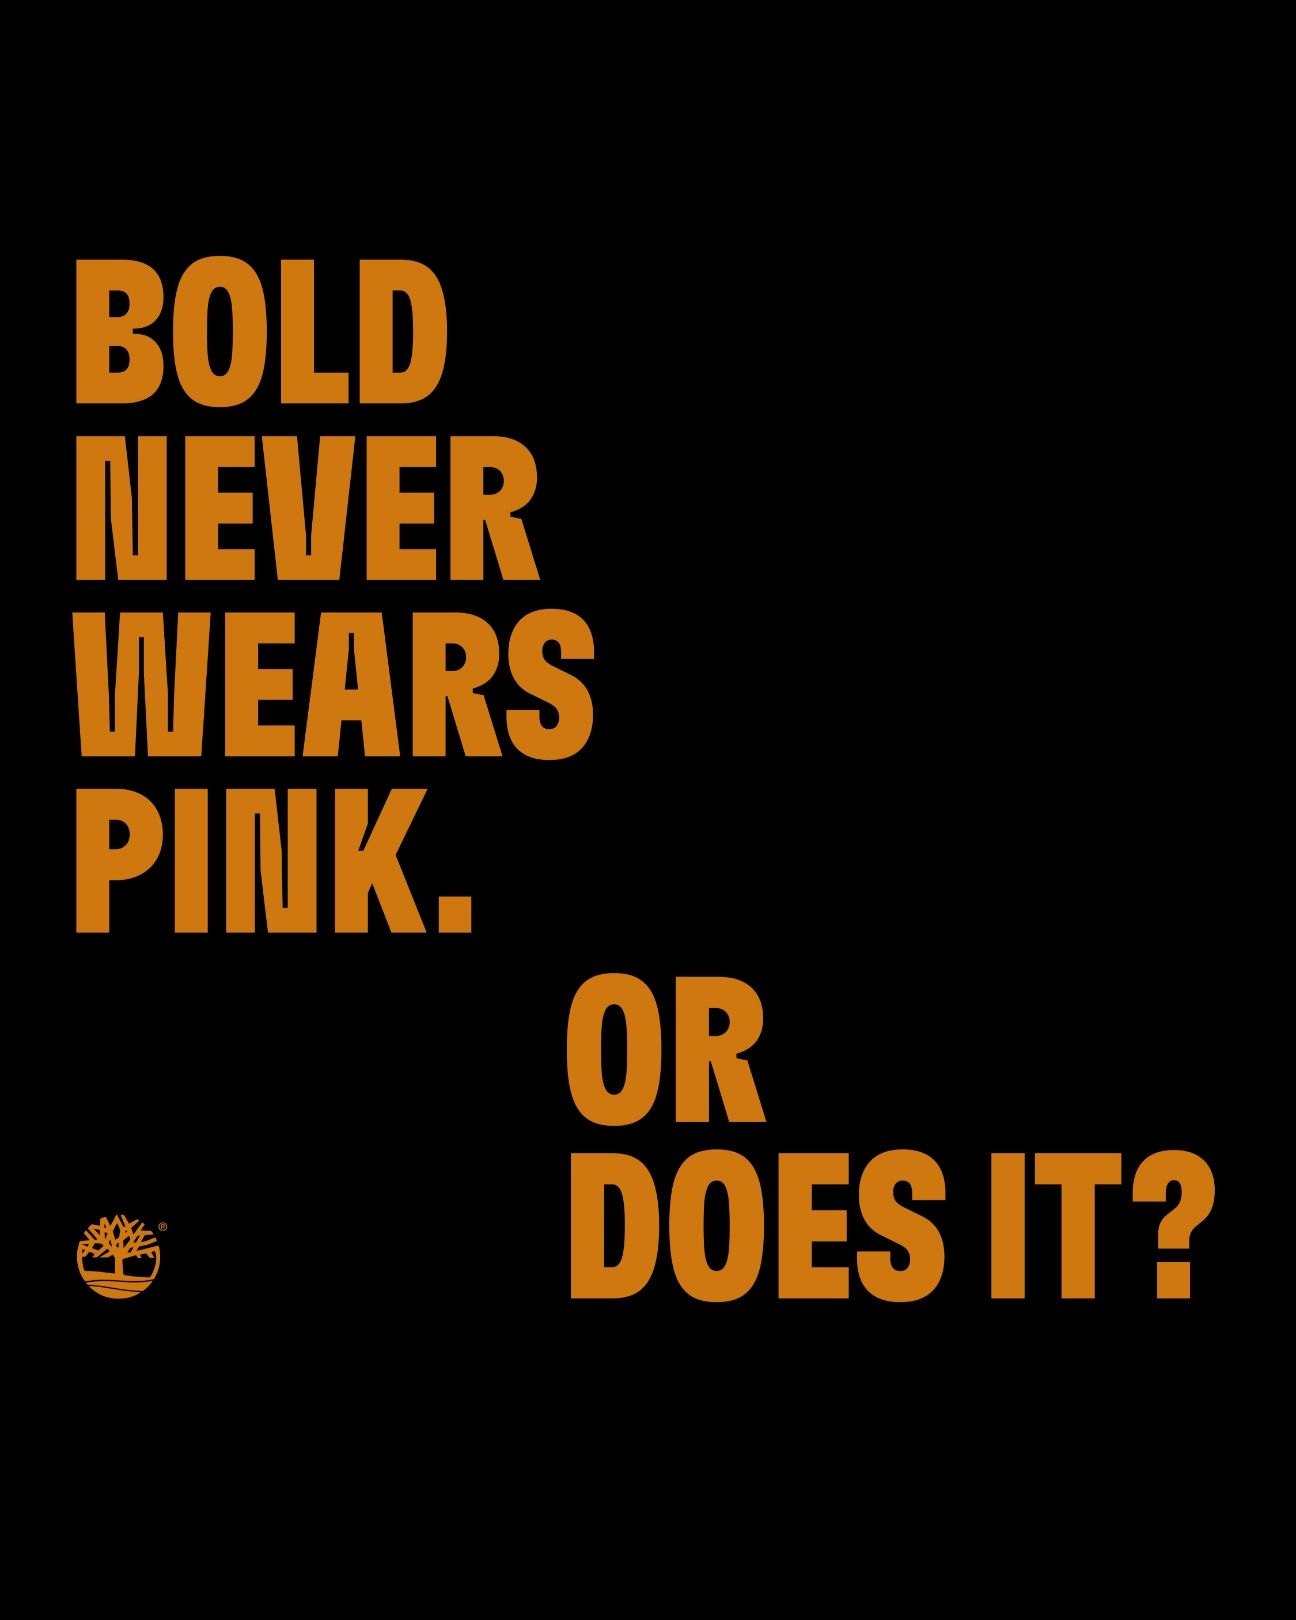 Bold never wears pink. or does it?